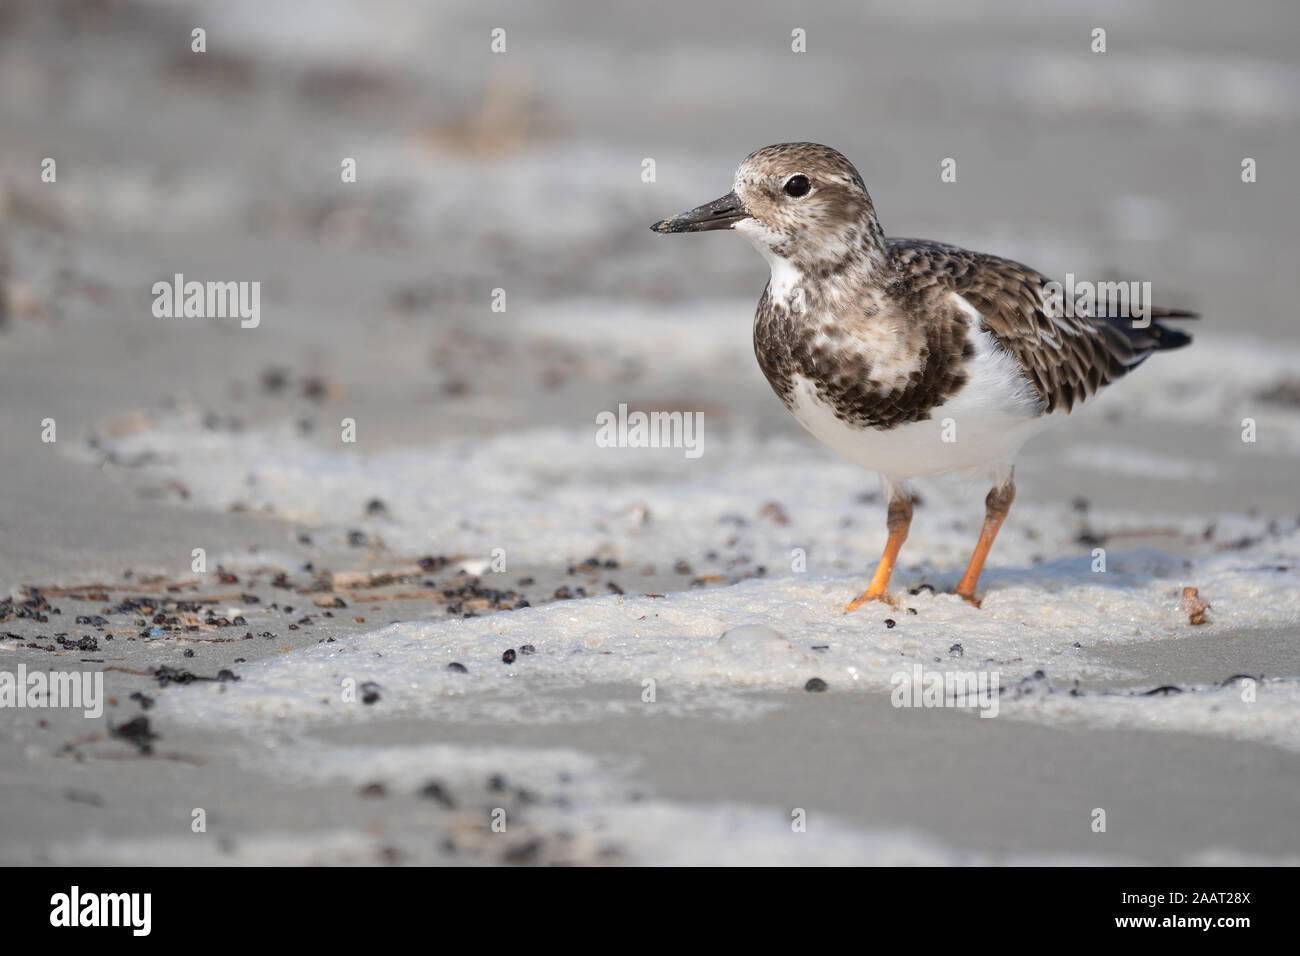 A ruddy turnstone walking the beach in search of food. Stock Photo